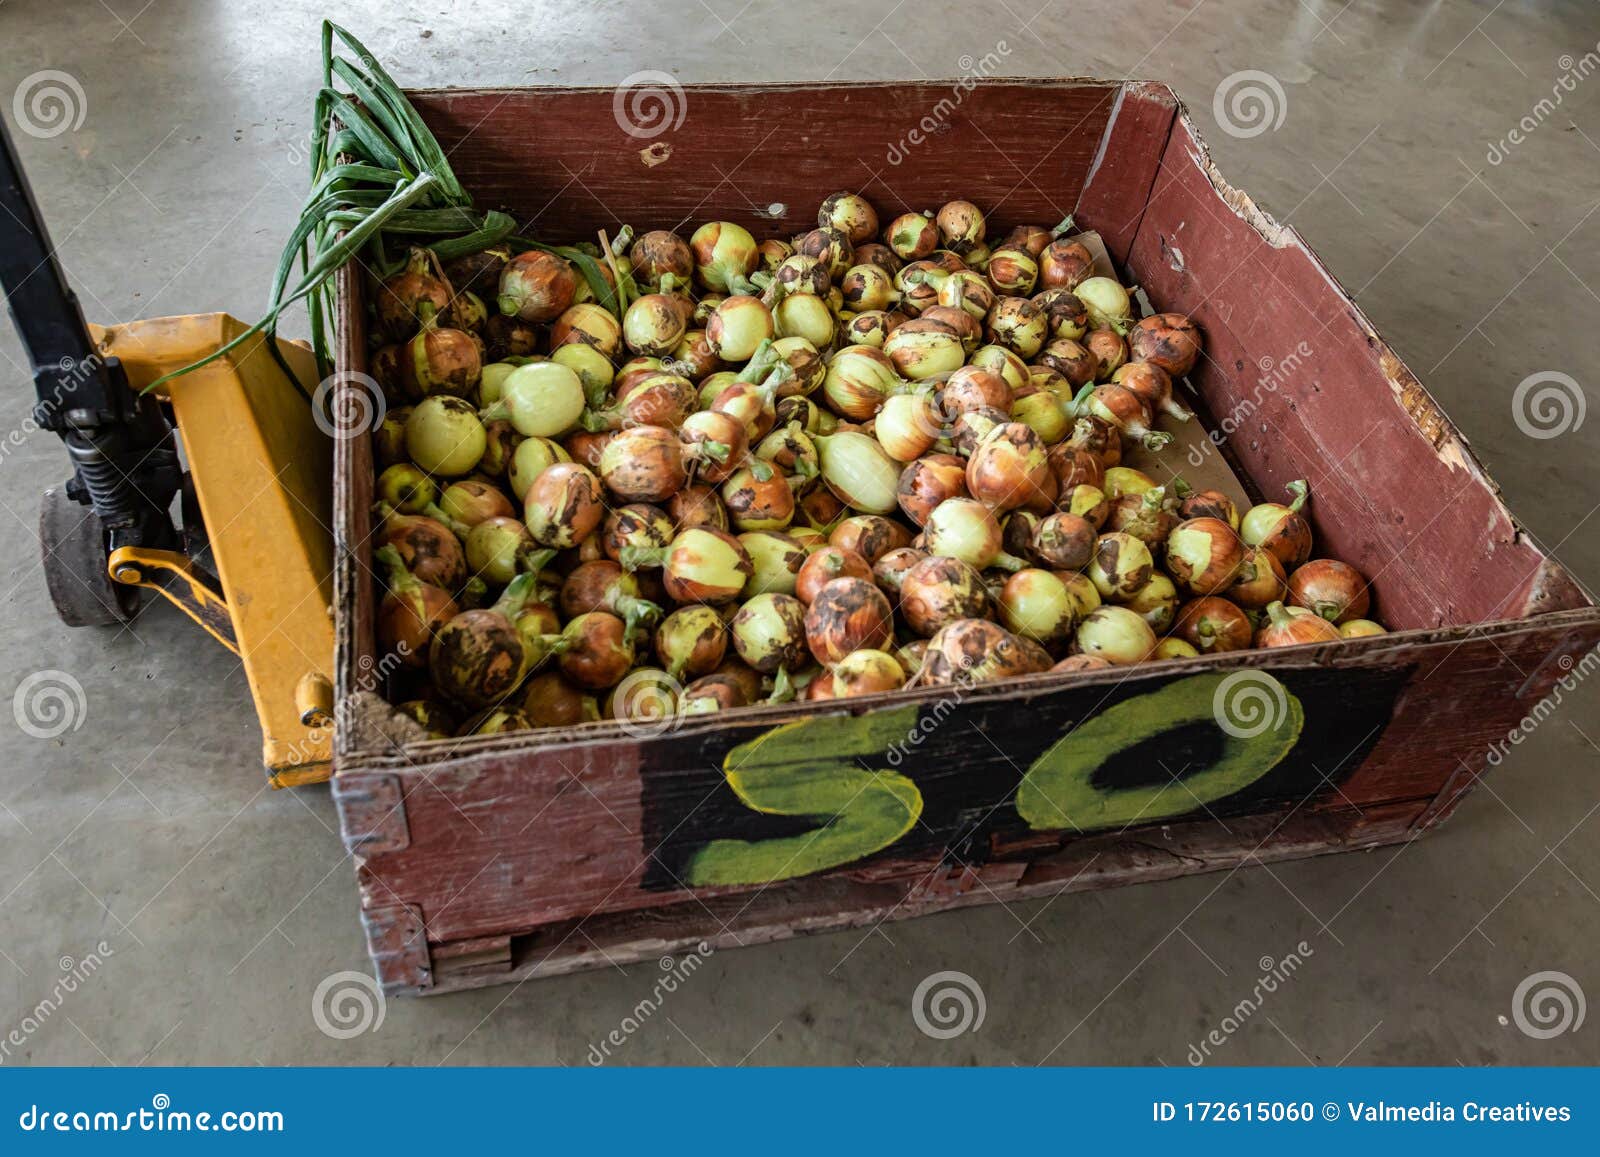 624 Forklift Food Photos Free Royalty Free Stock Photos From Dreamstime